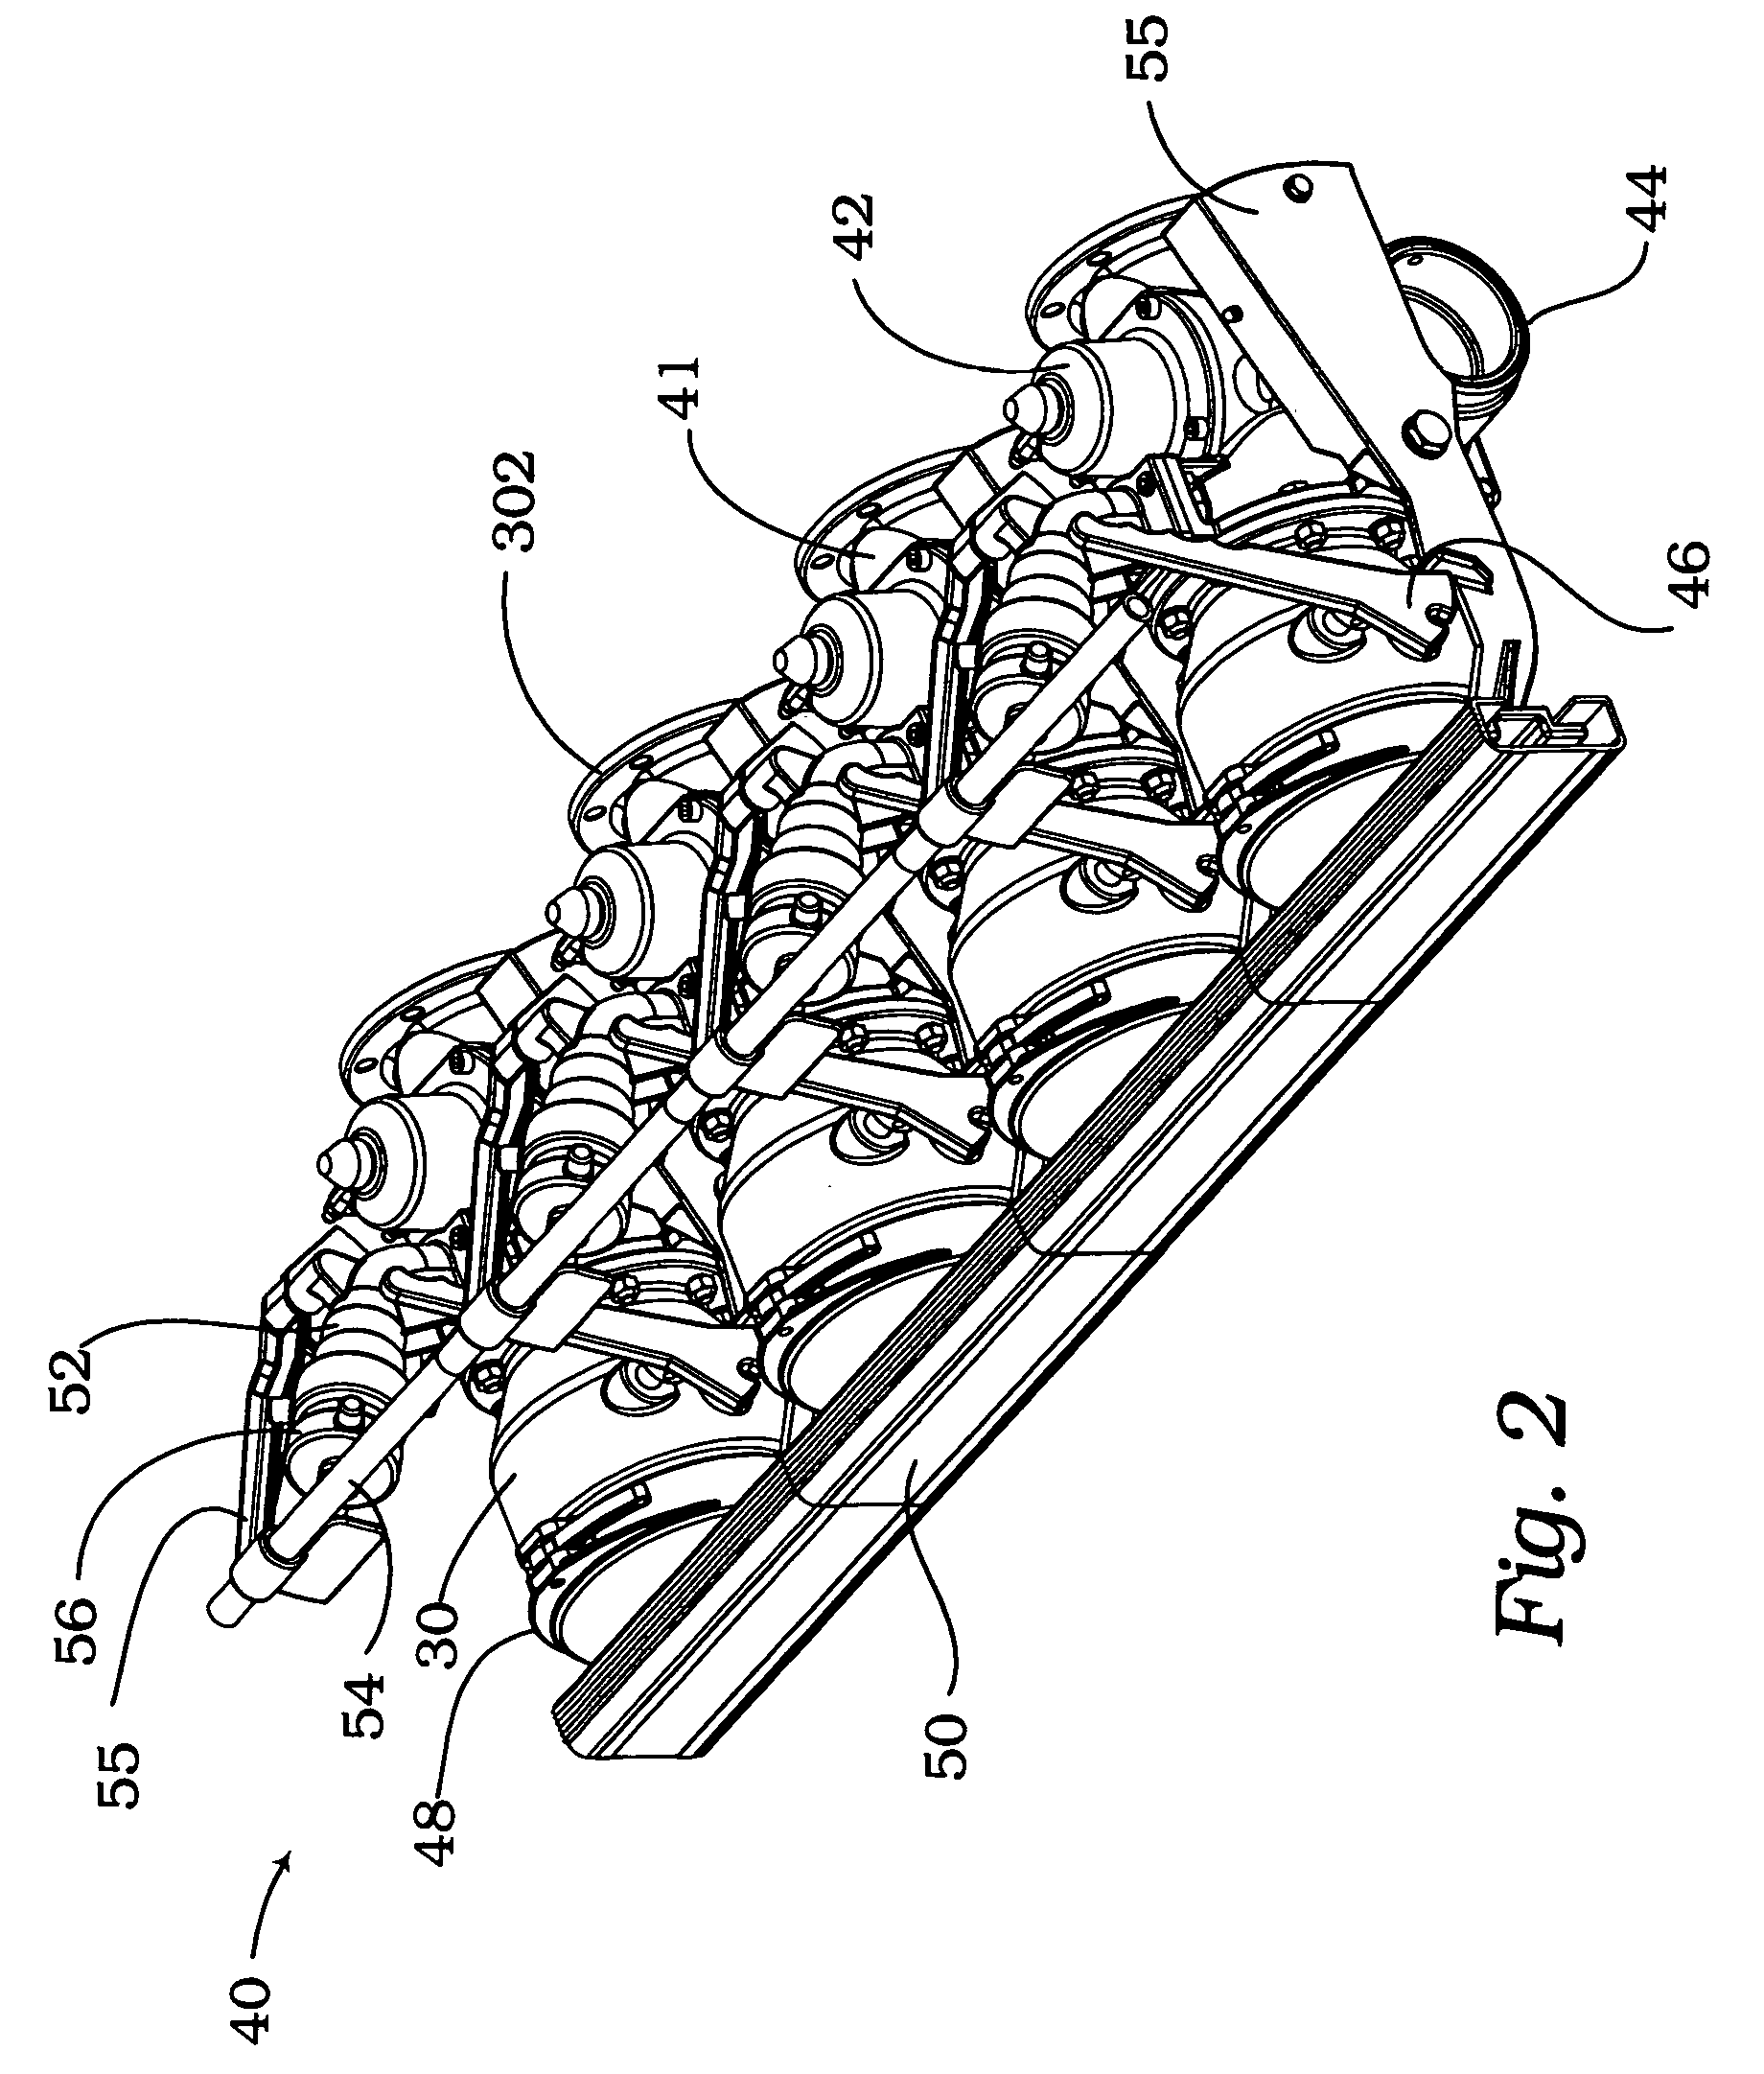 Modular multi-port manifold and fuel delivery system